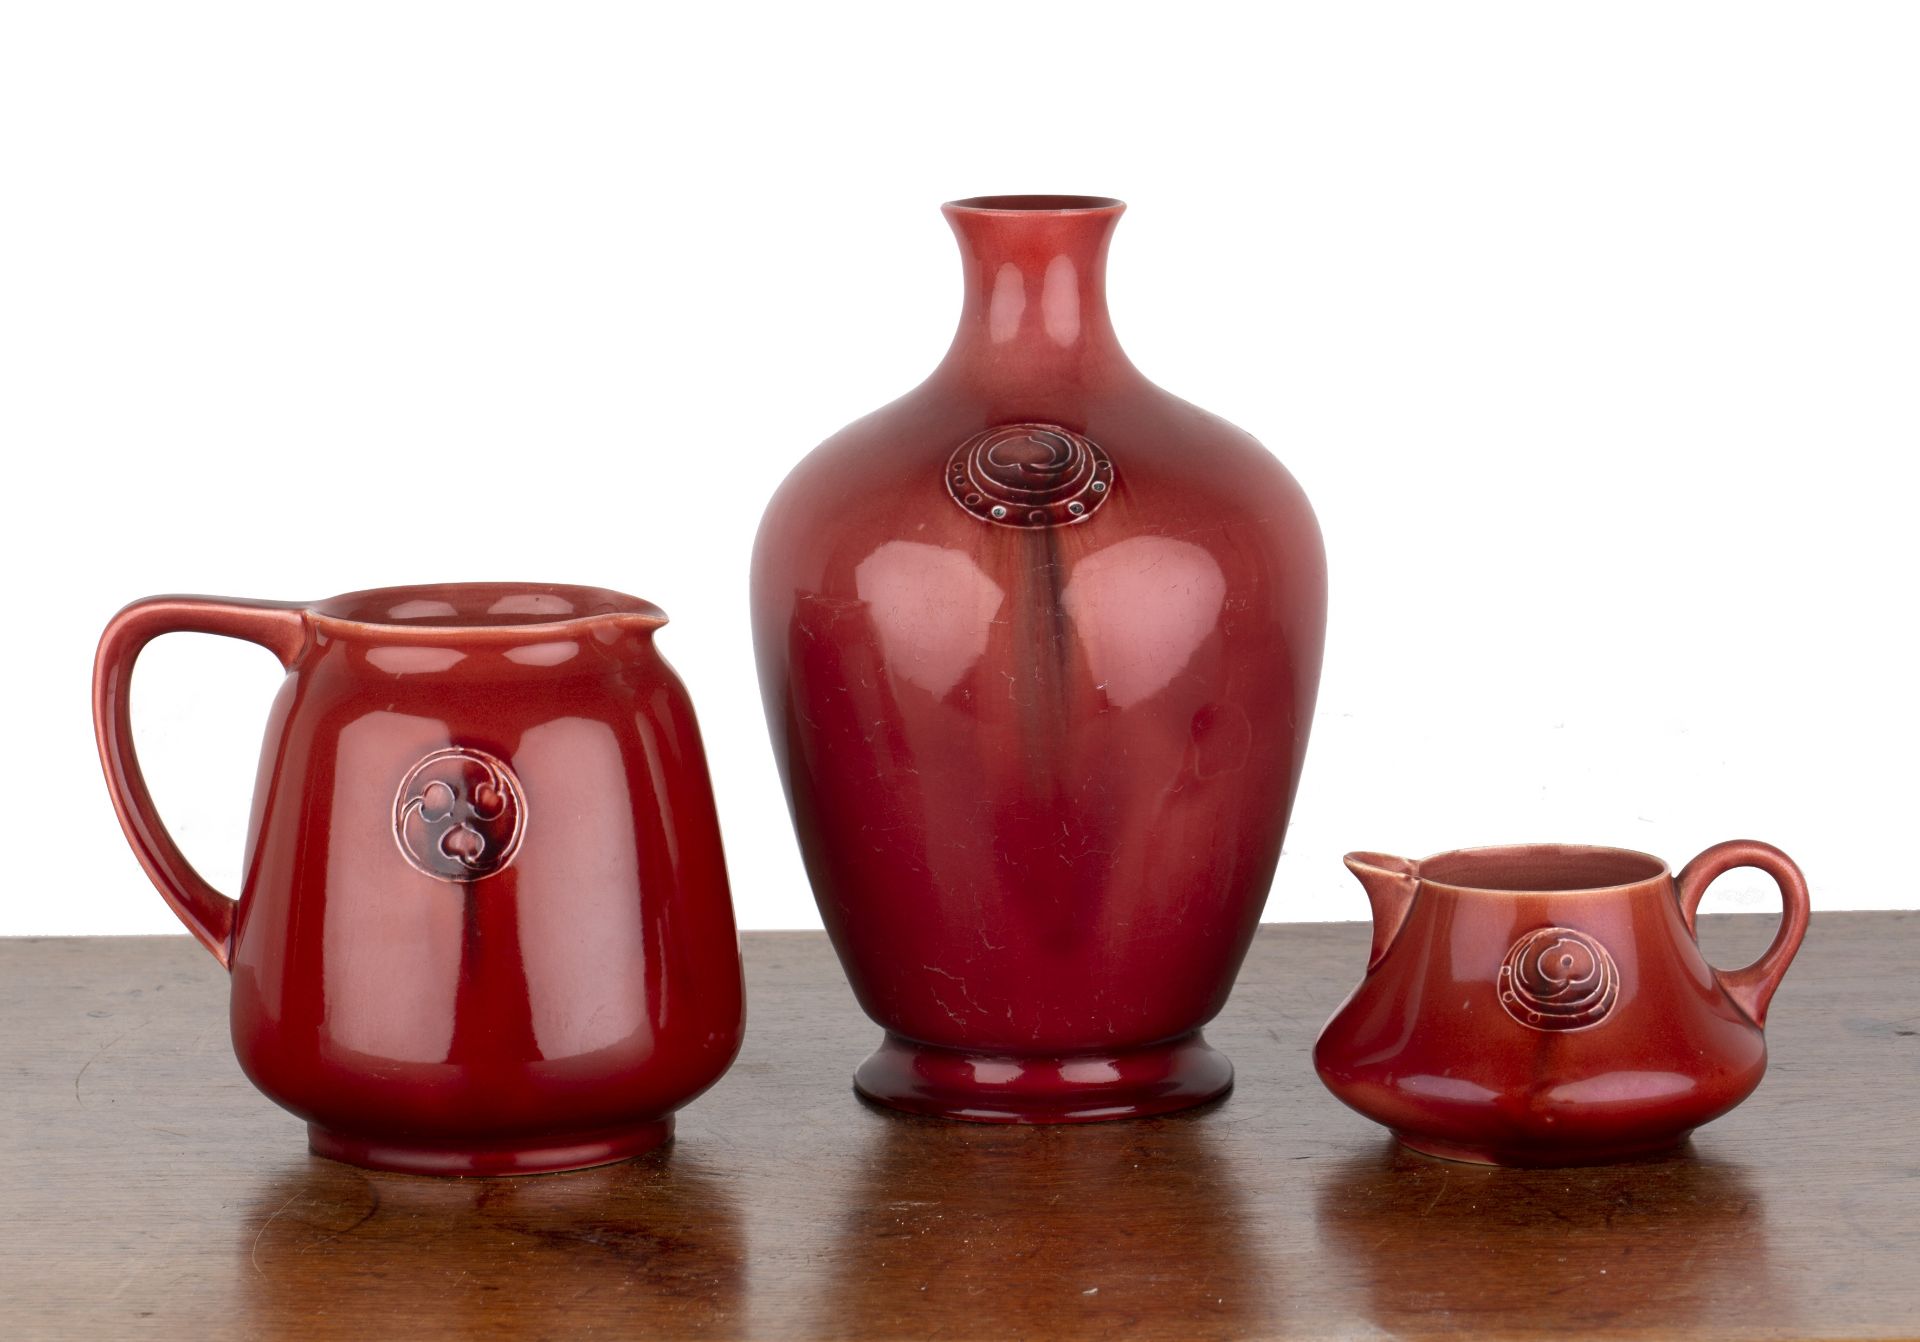 William Moorcroft (1872-1945) for Liberty and Co 'Flamminian ware' in red colourway, with foliate